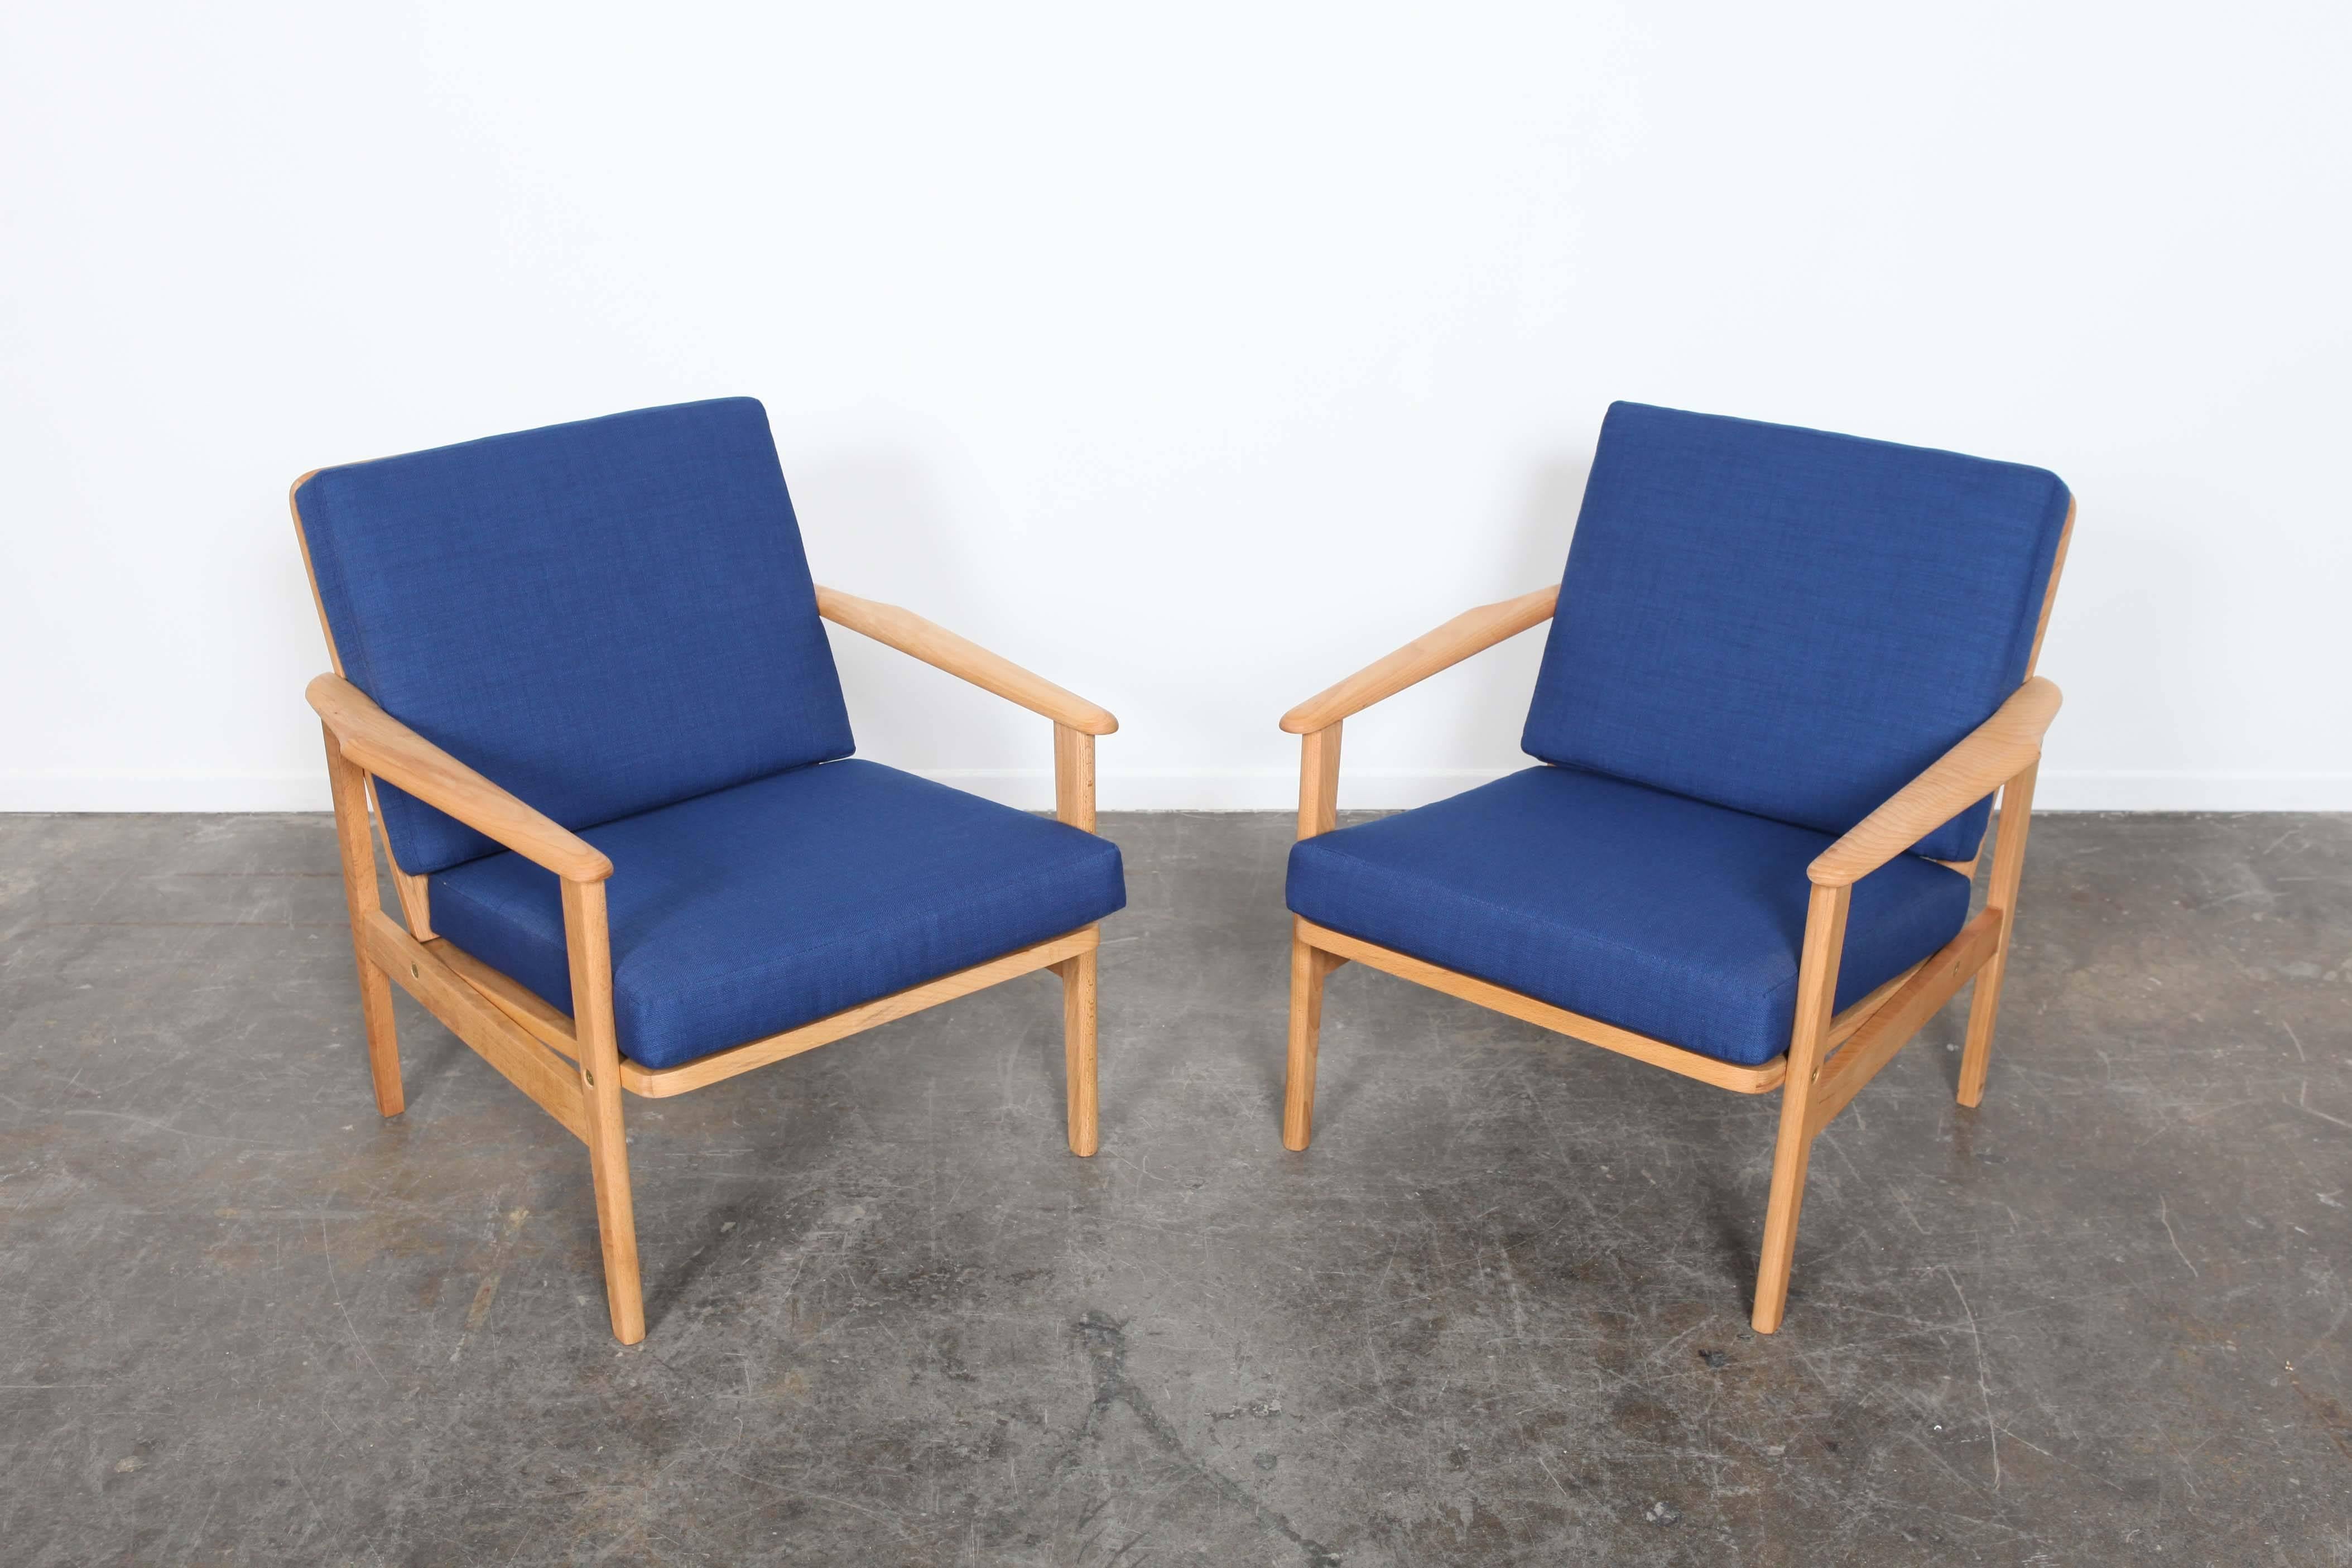 English Pair of Mid-Century Modern Low Back Wood Framed Lounge Chairs